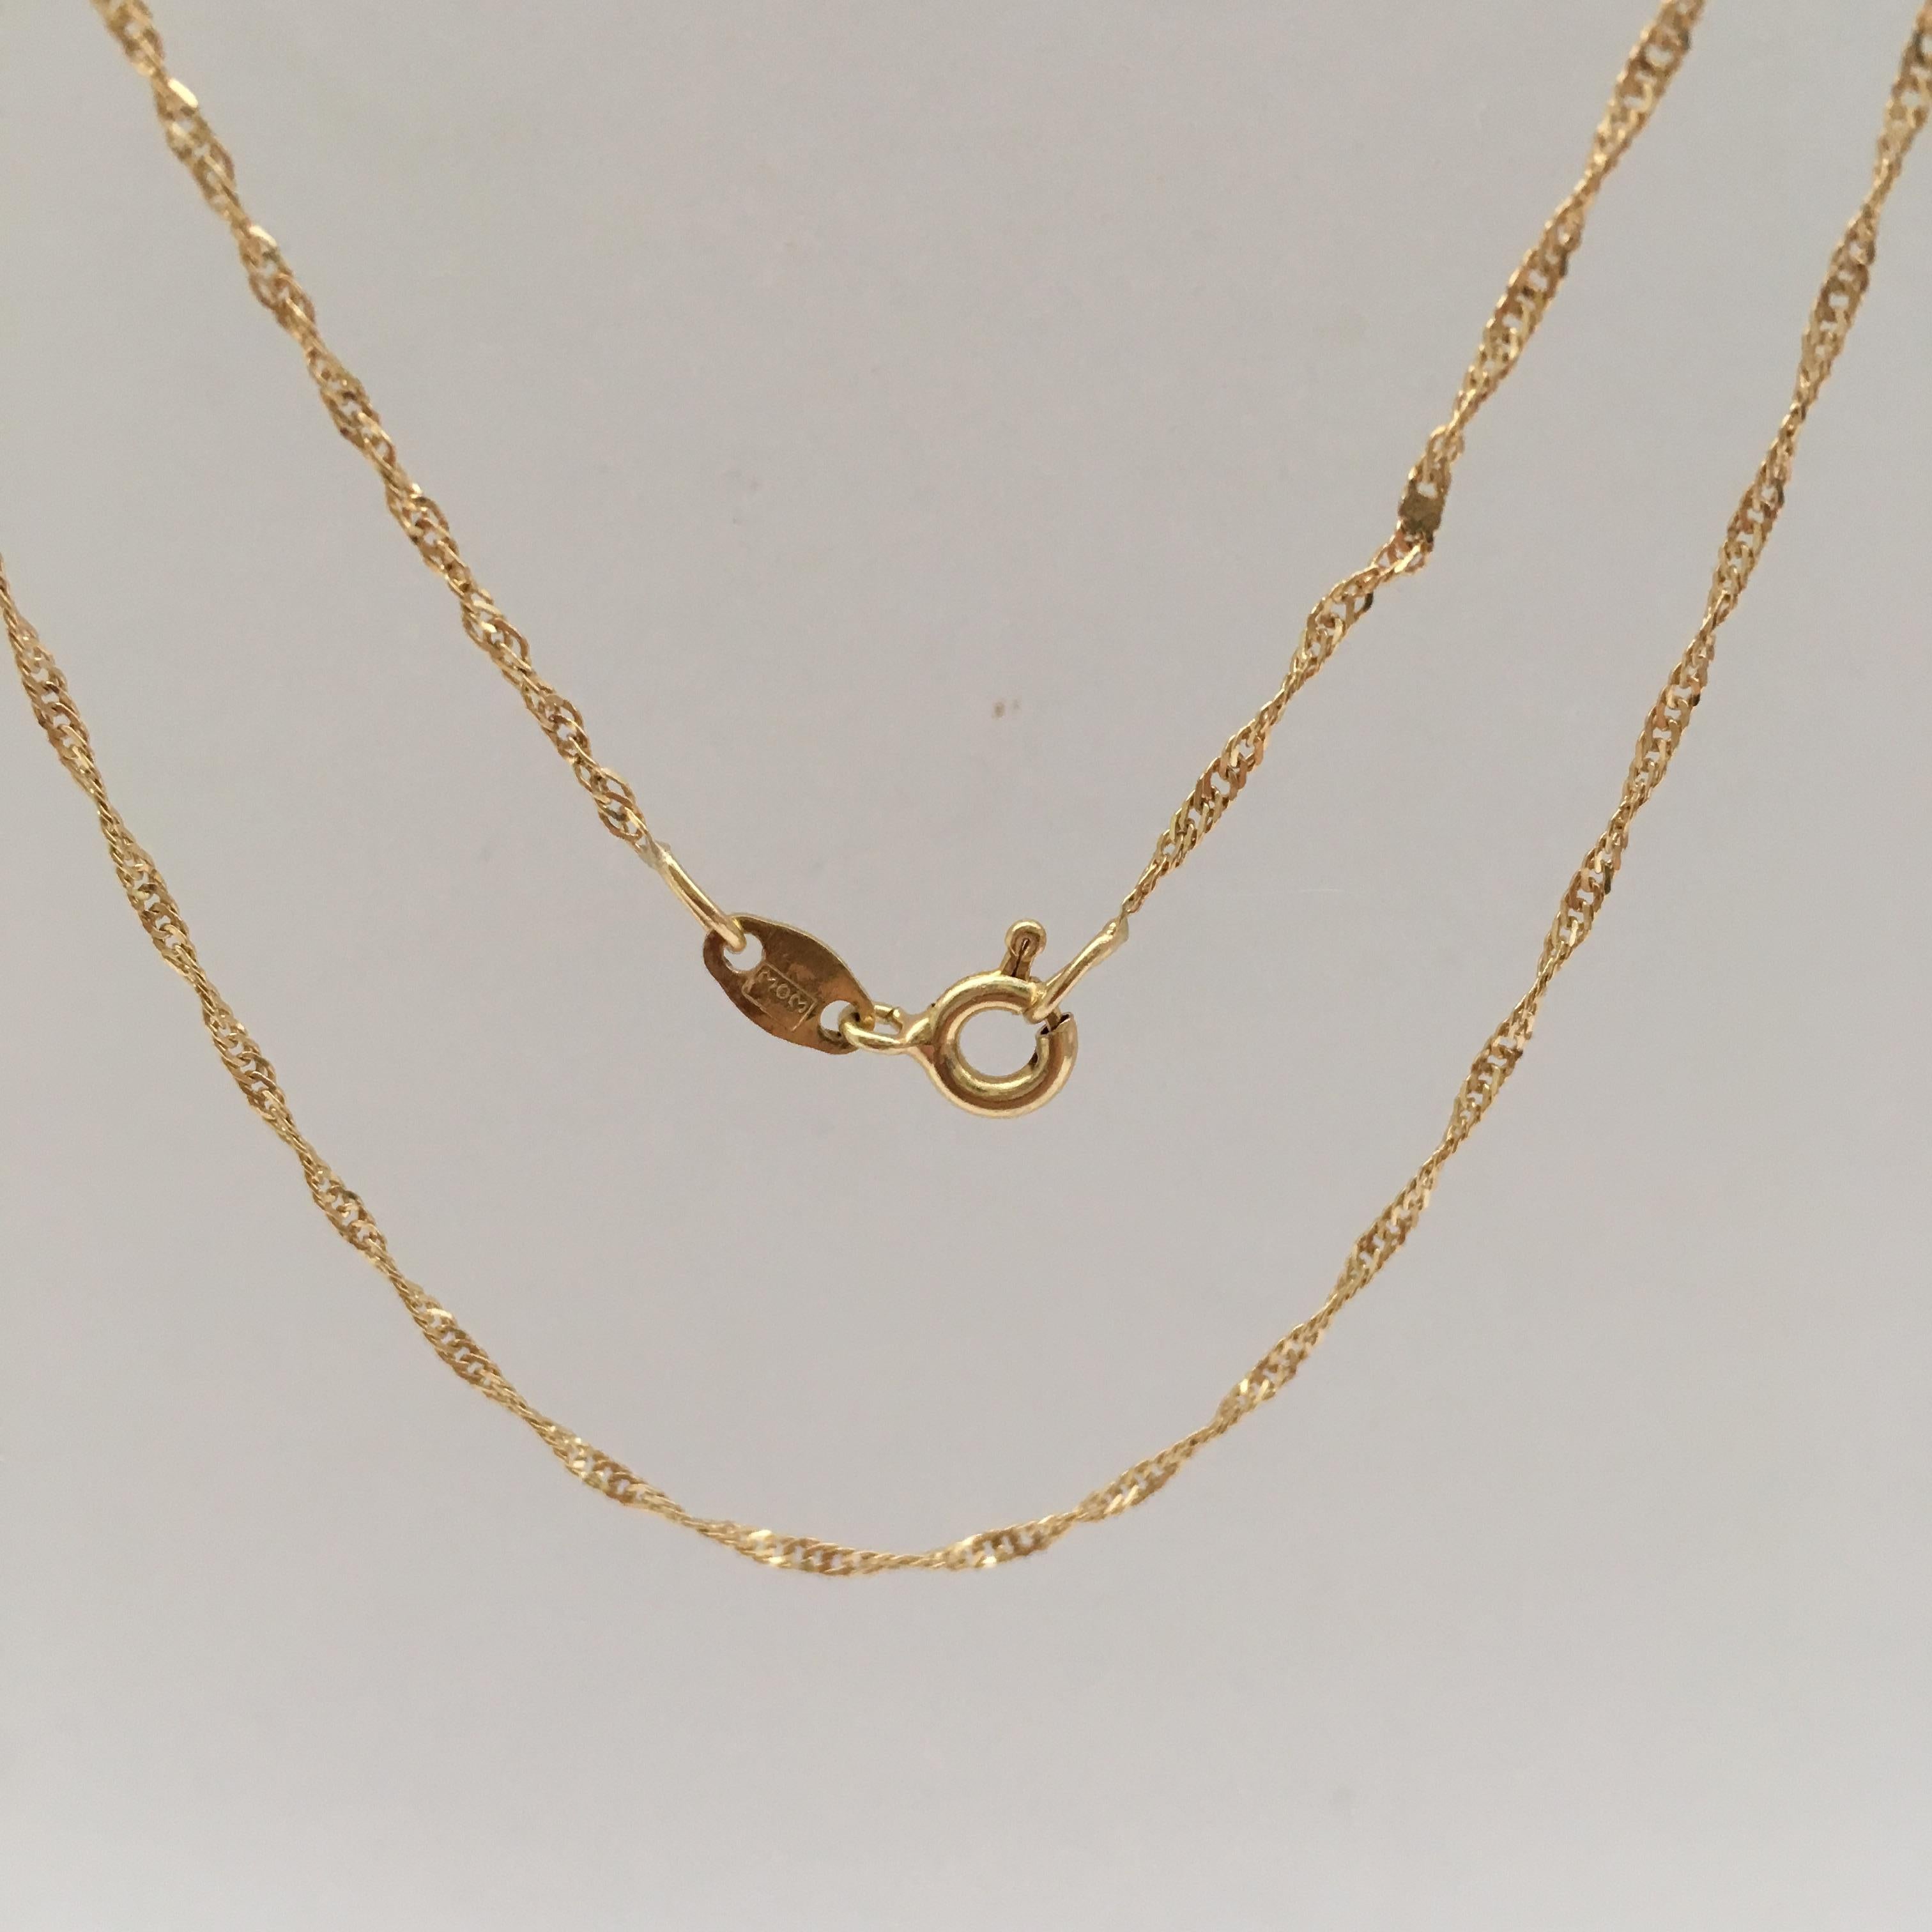 Vintage 18 Karat Gold Chain Bright Yellow Gold Fine Twisted Necklace 1